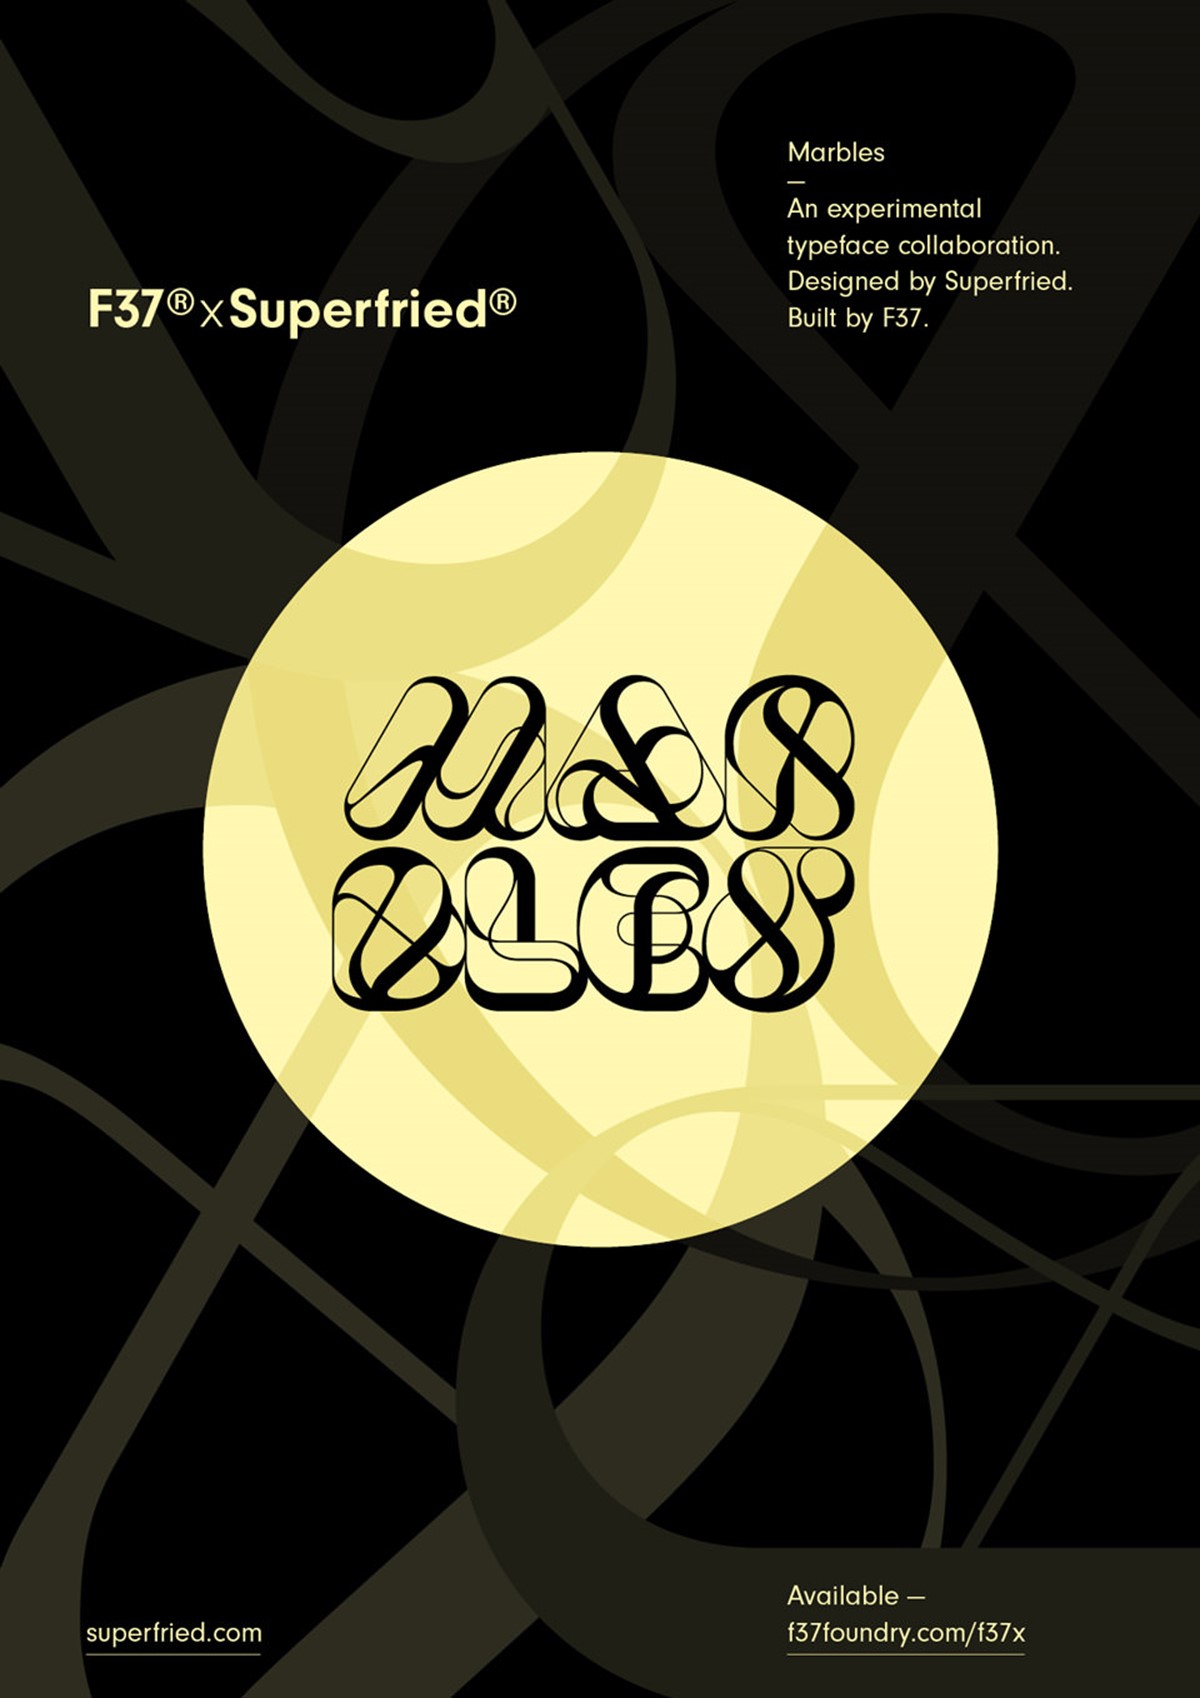 Marbles – An experimental typeface collaboration. Designed by Superfried. Built by F37. Manchester. Yellow logo poster.